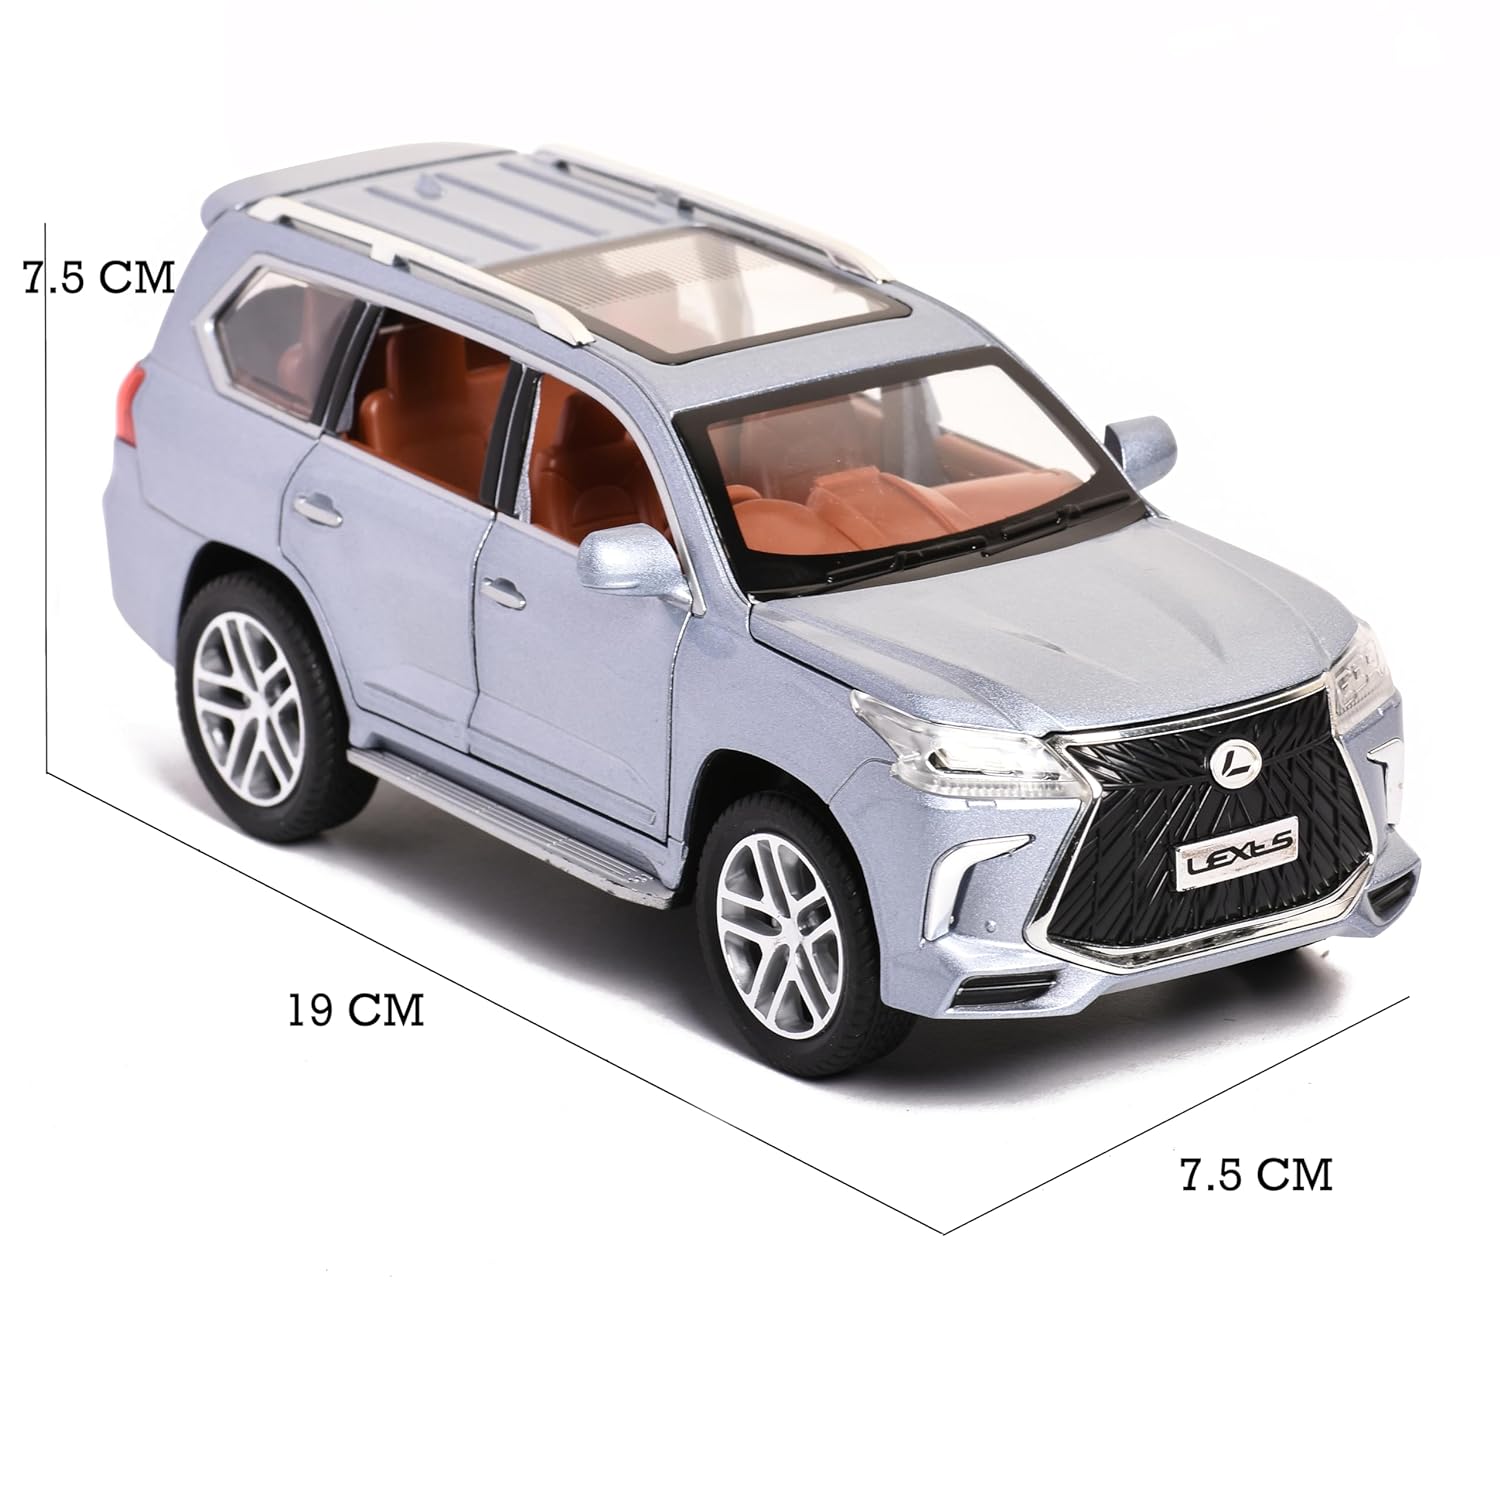 Braintastic Model Diecast Car Toy Vehicle Pull Back Friction Car with Openable Doors Light & Music Toys for Kids Age 3+ Years (Lexus Grey)